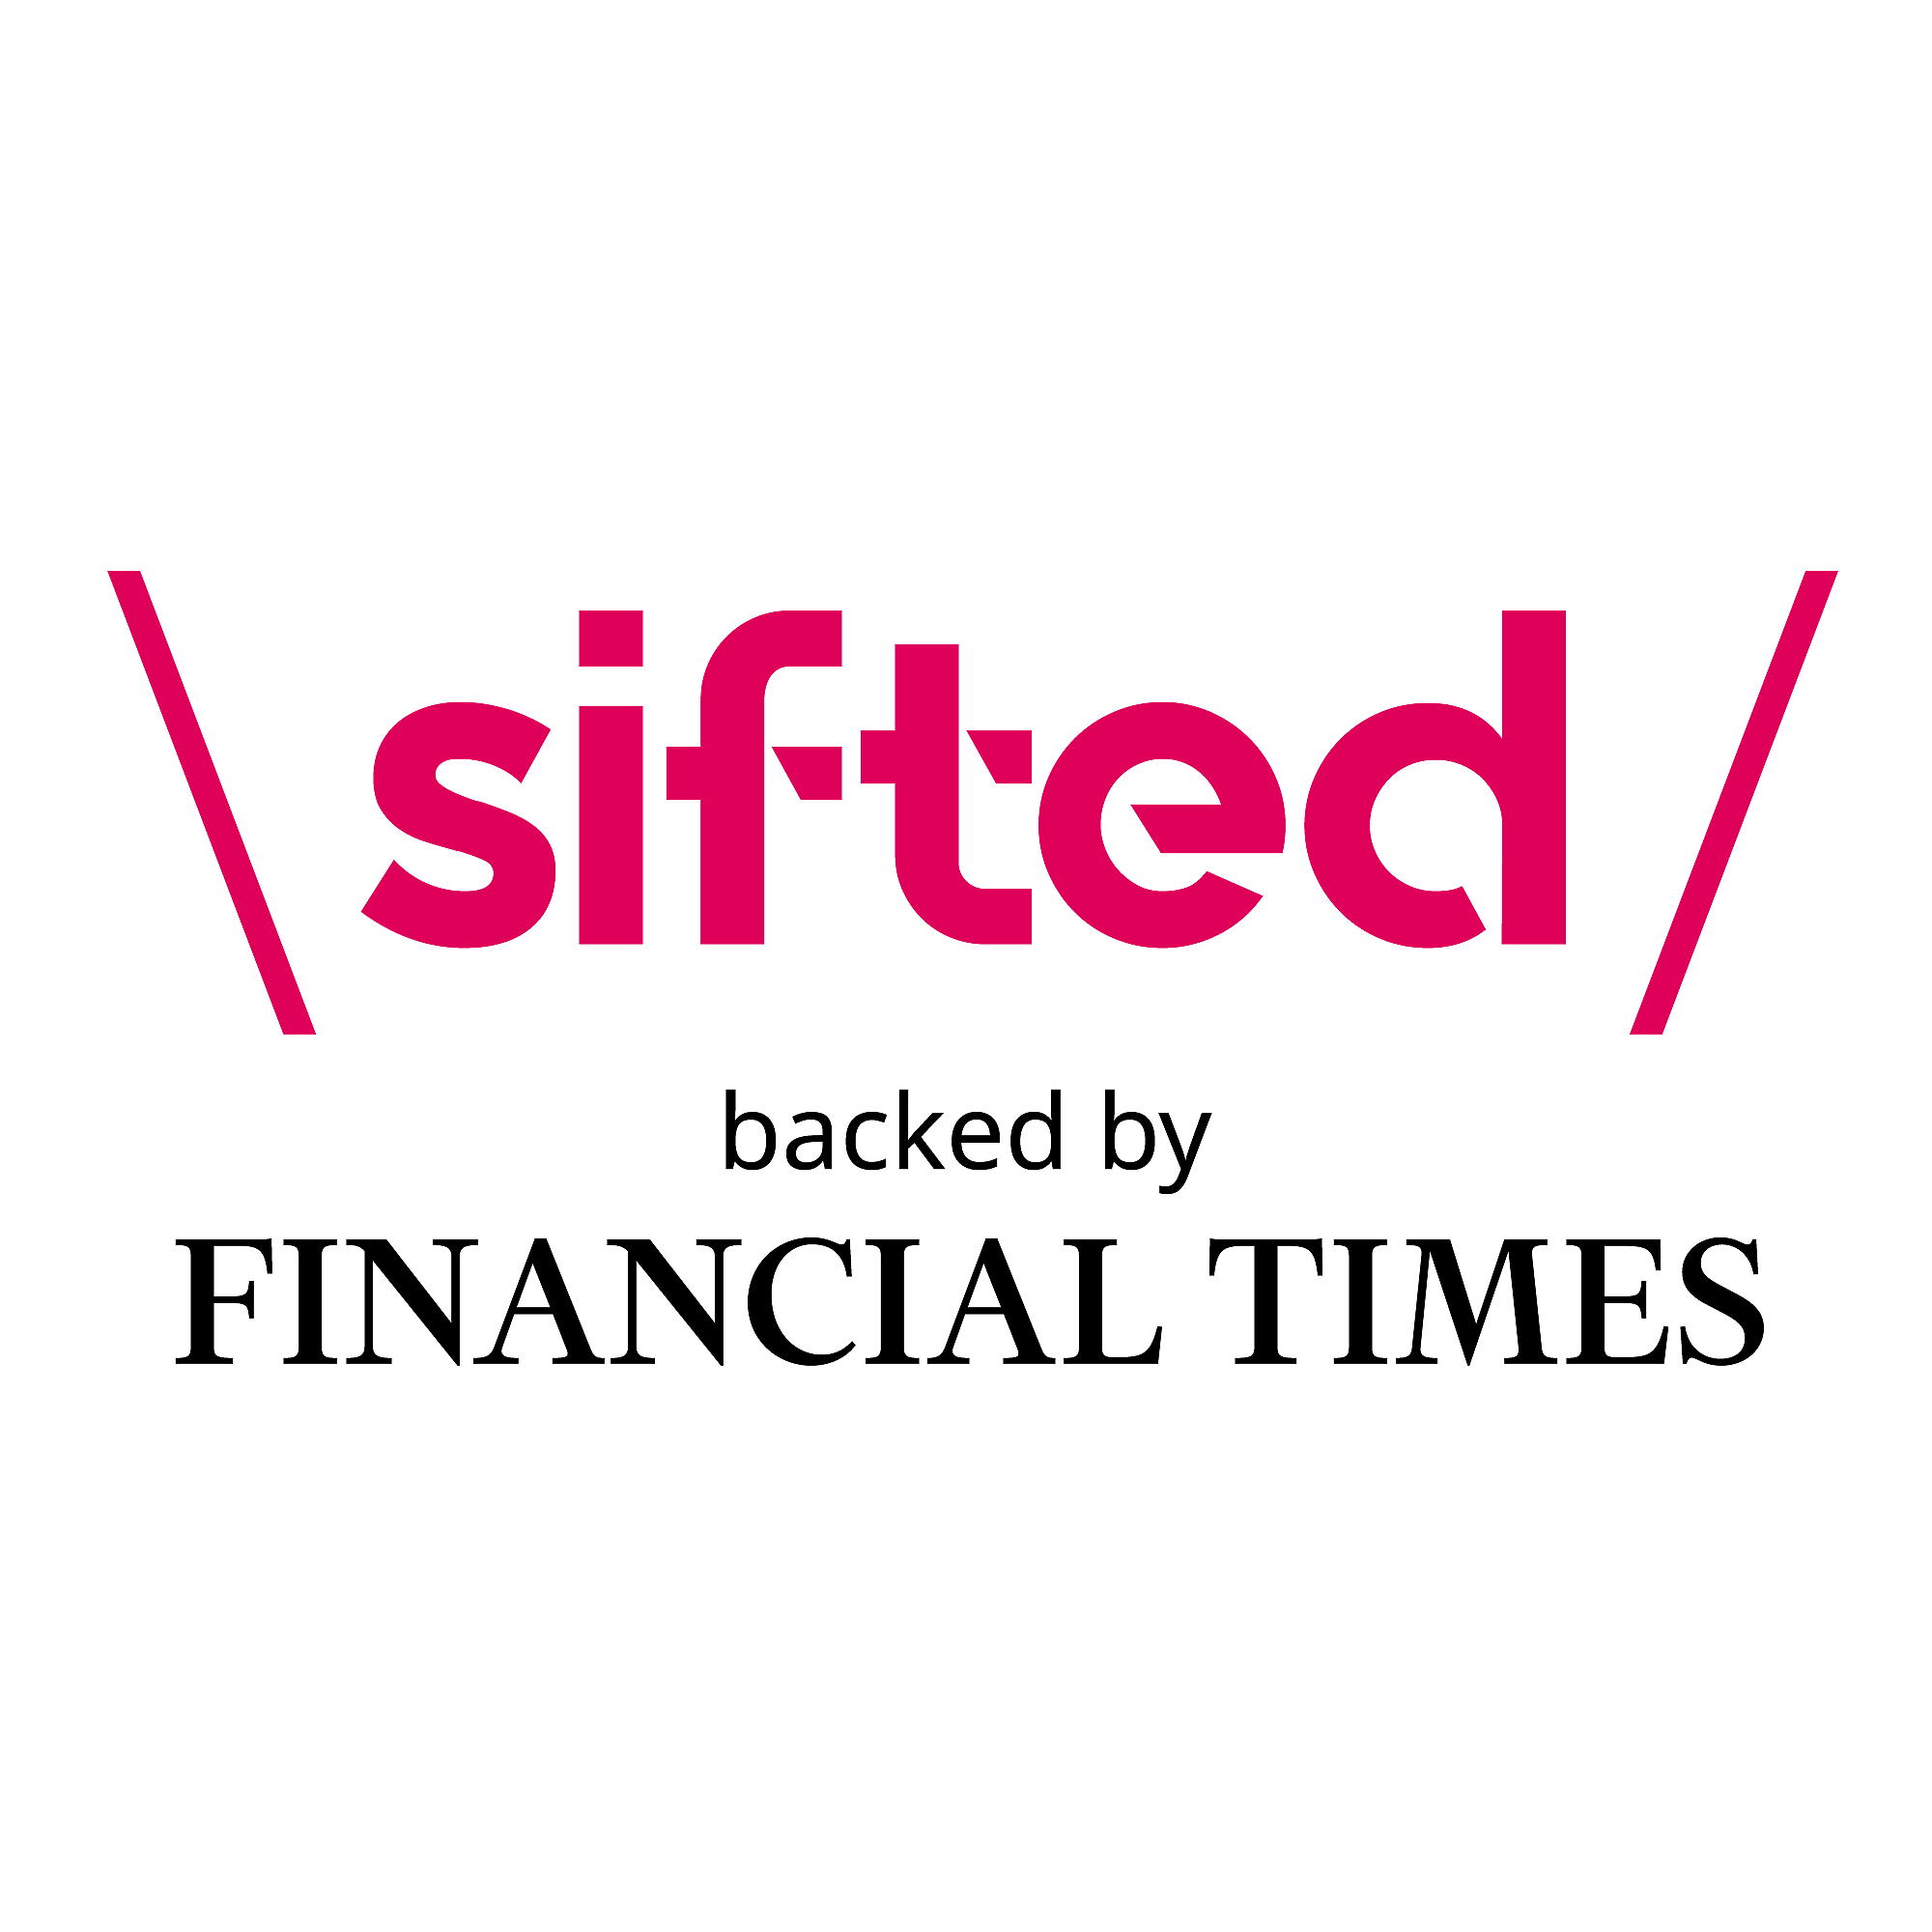 Sifted logo